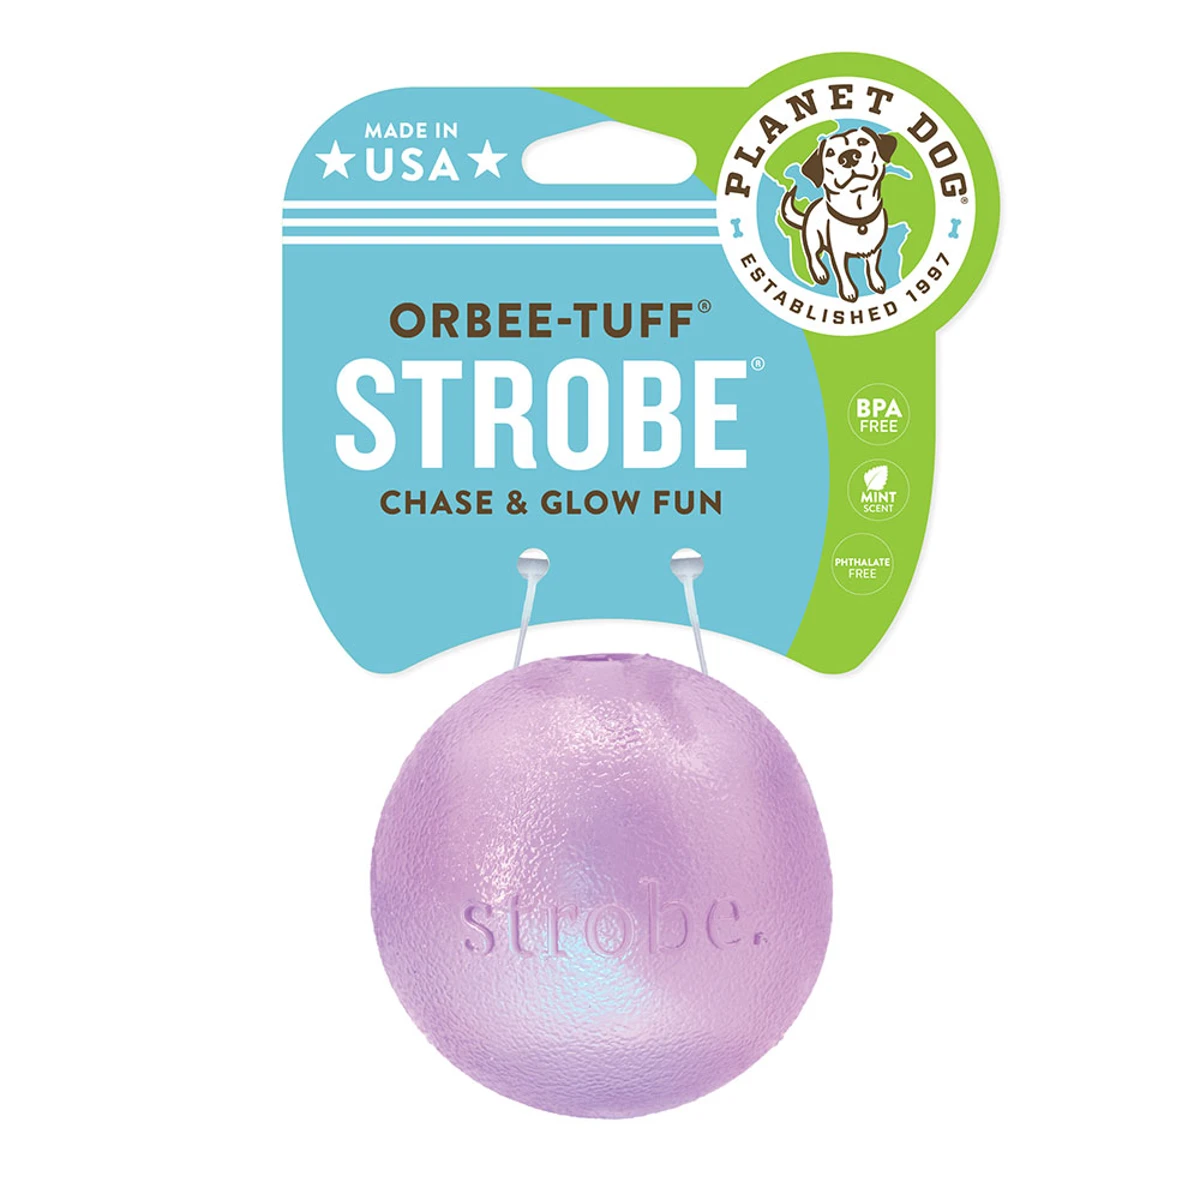 https://images.baxterboo.com/global/images/products/large/planet-dog-orbee-tuff-strobe-ball-dog-toy-green-2468.webp